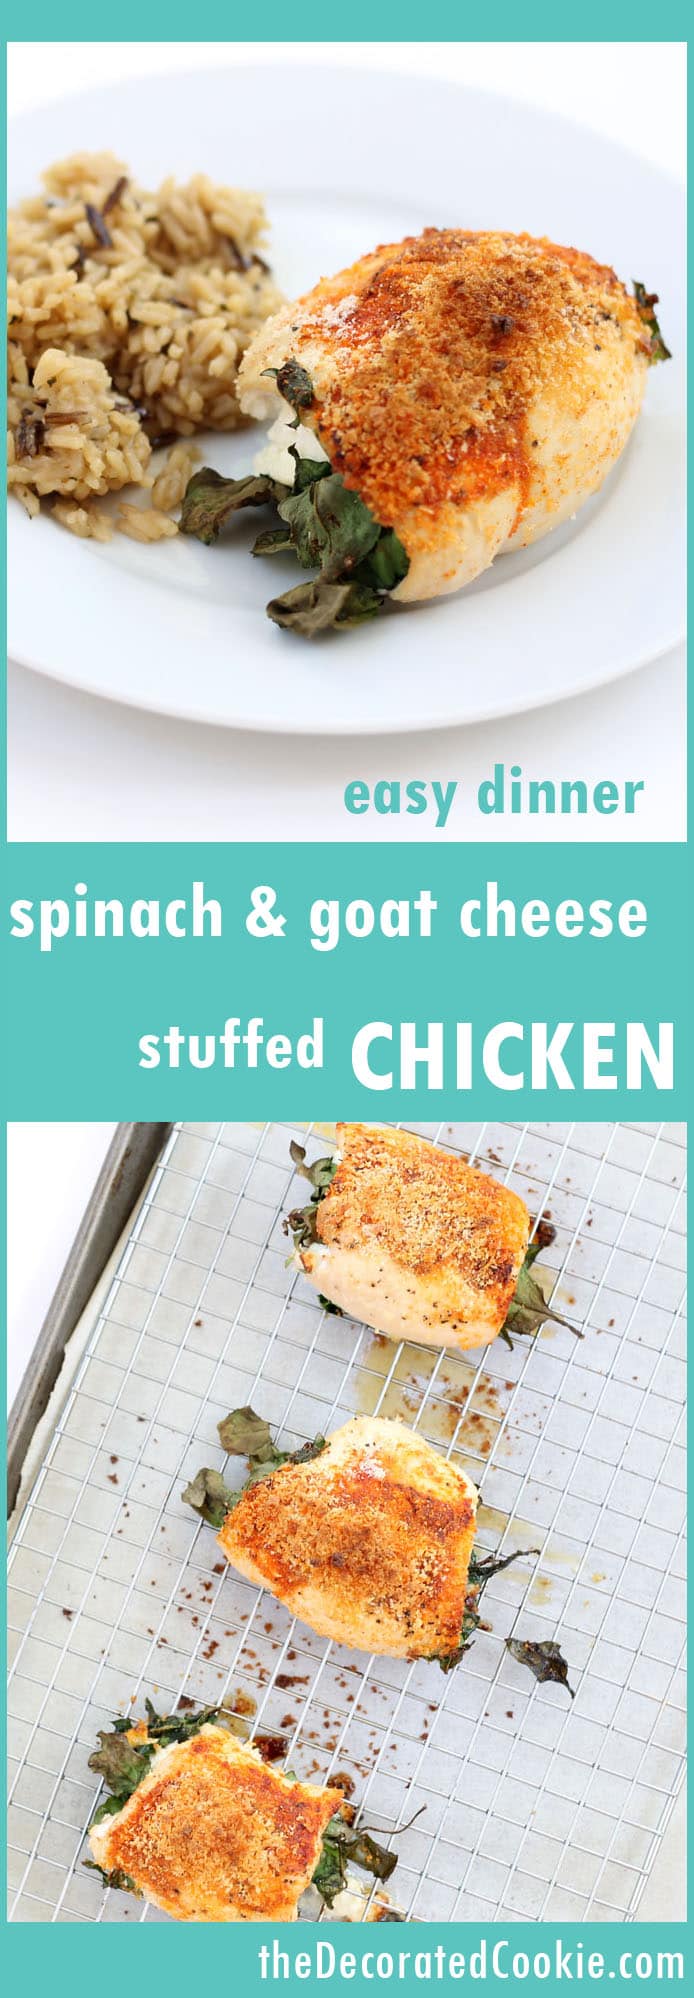 easy dinner: spinach and goat cheese stuffed chicken 